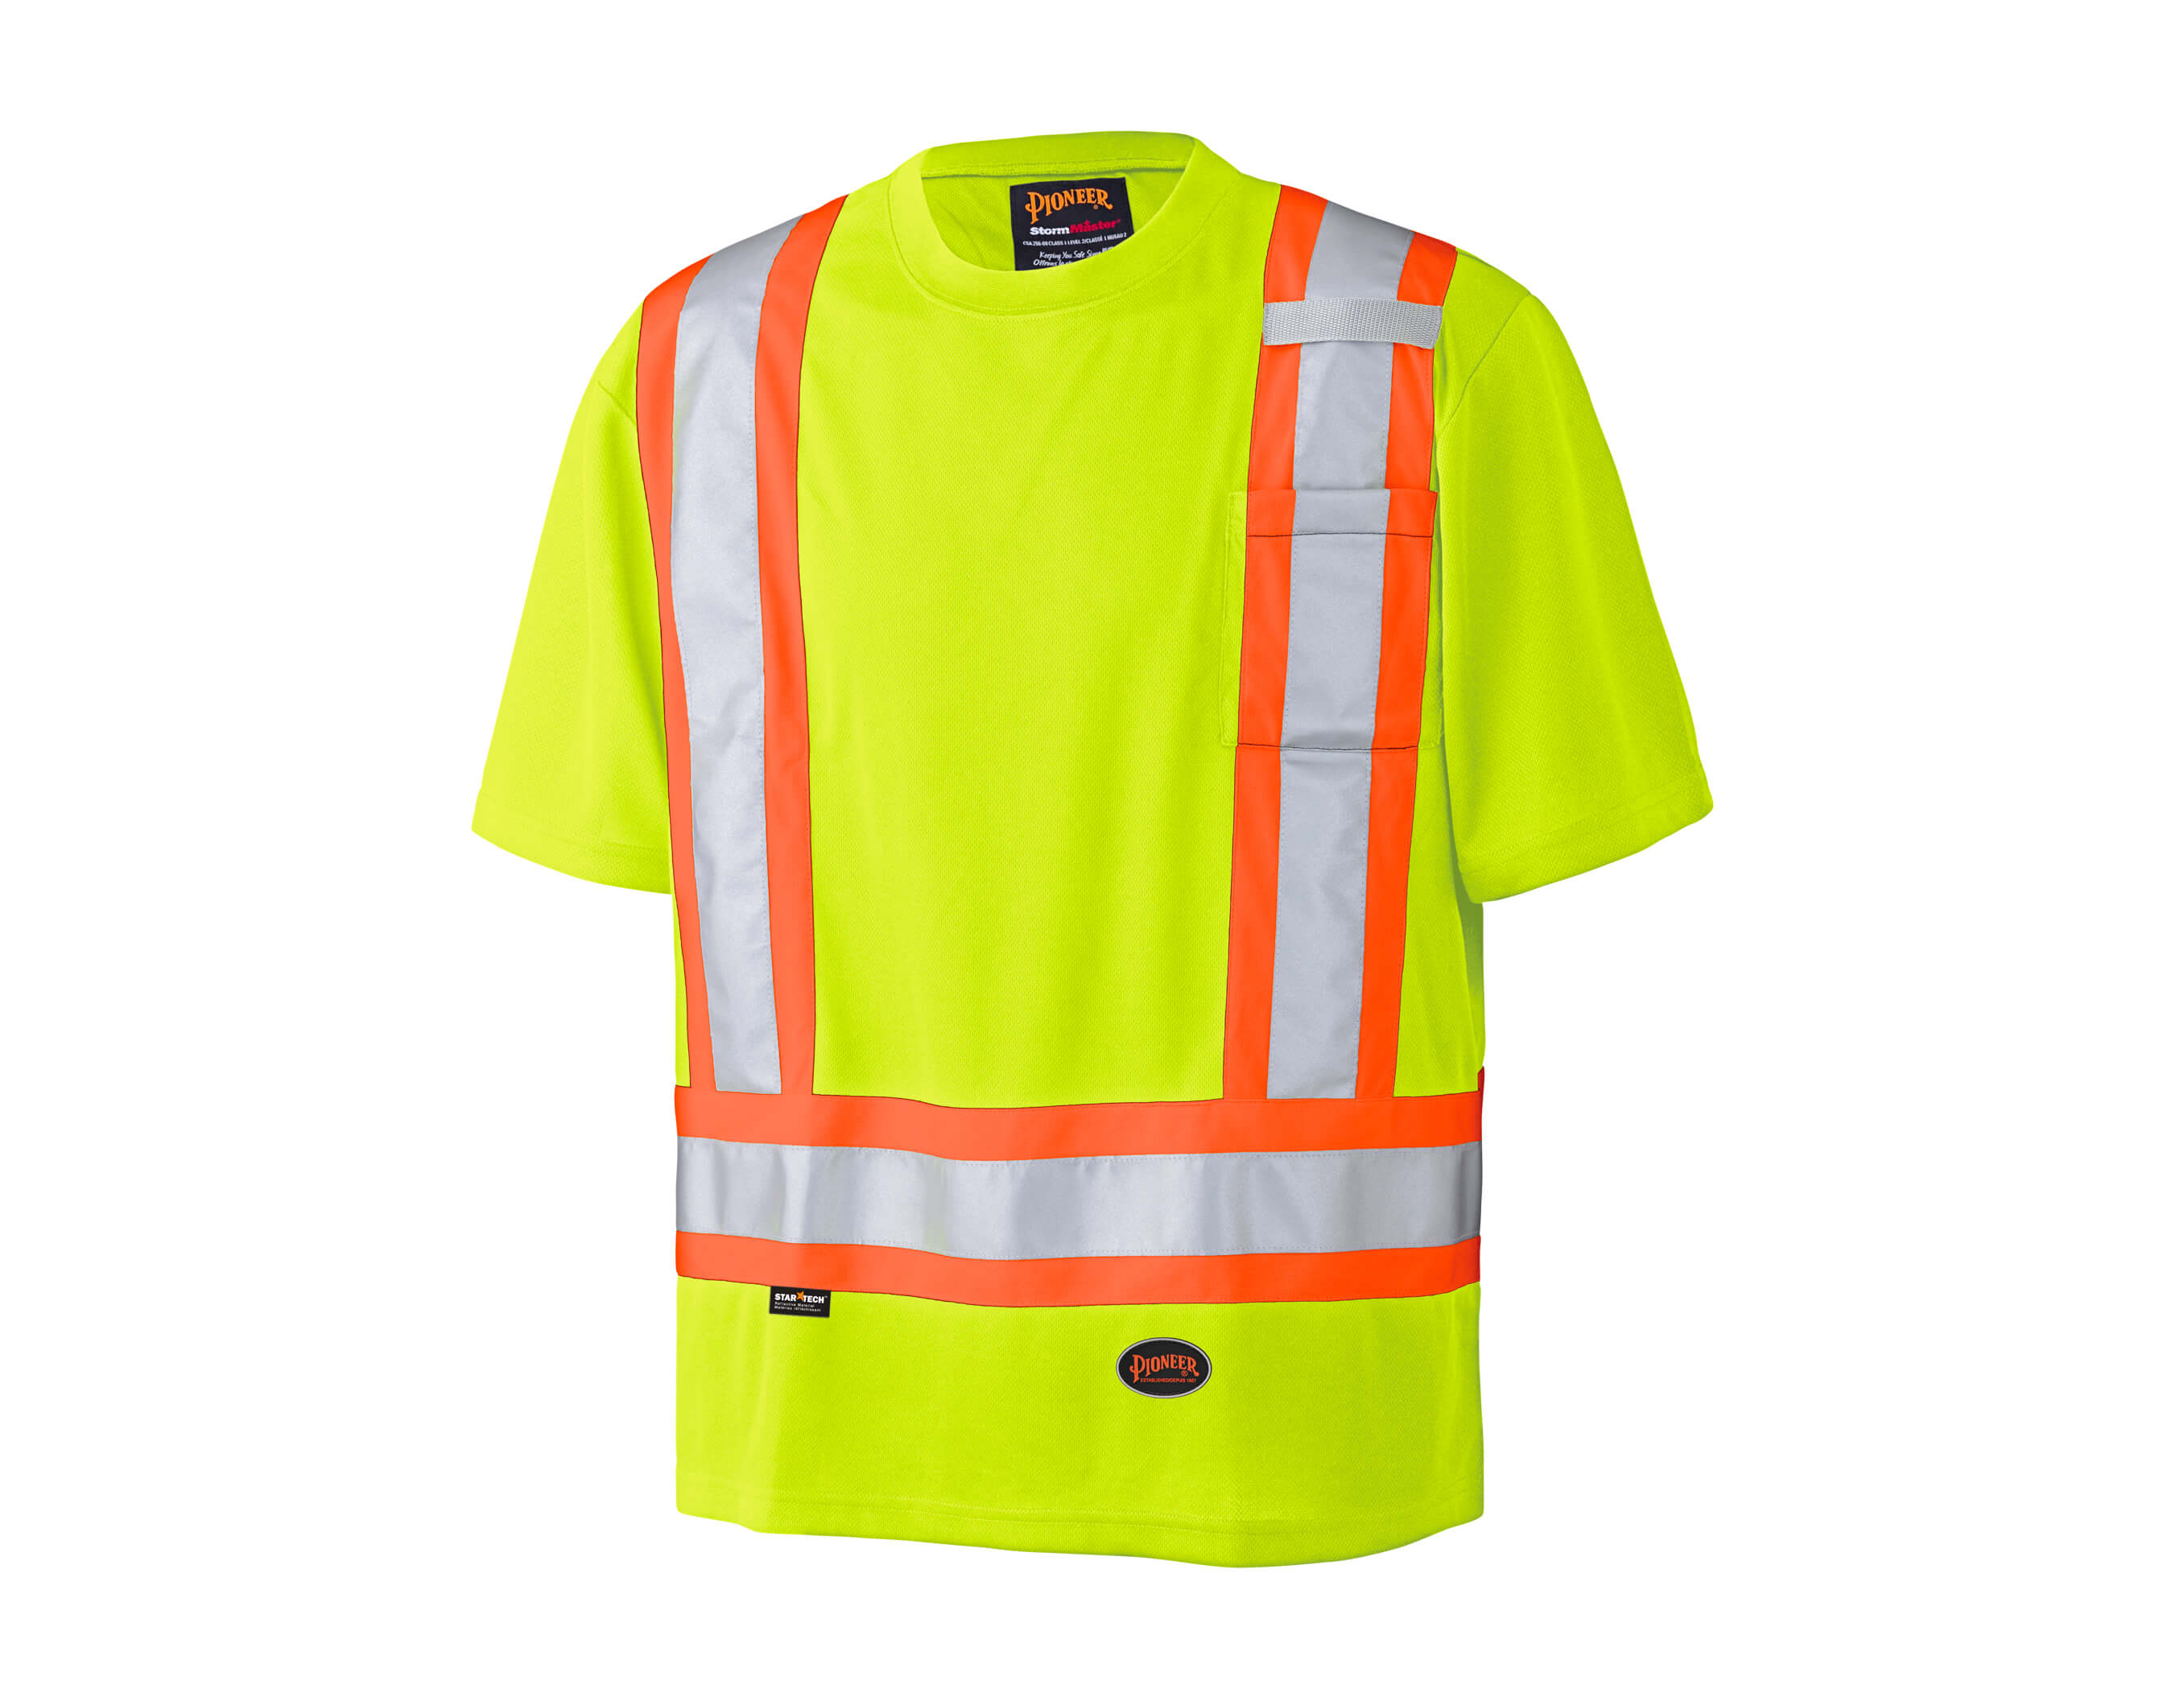 HI-VIS POLYESTER T-SHIRT S/S - YELLOW S